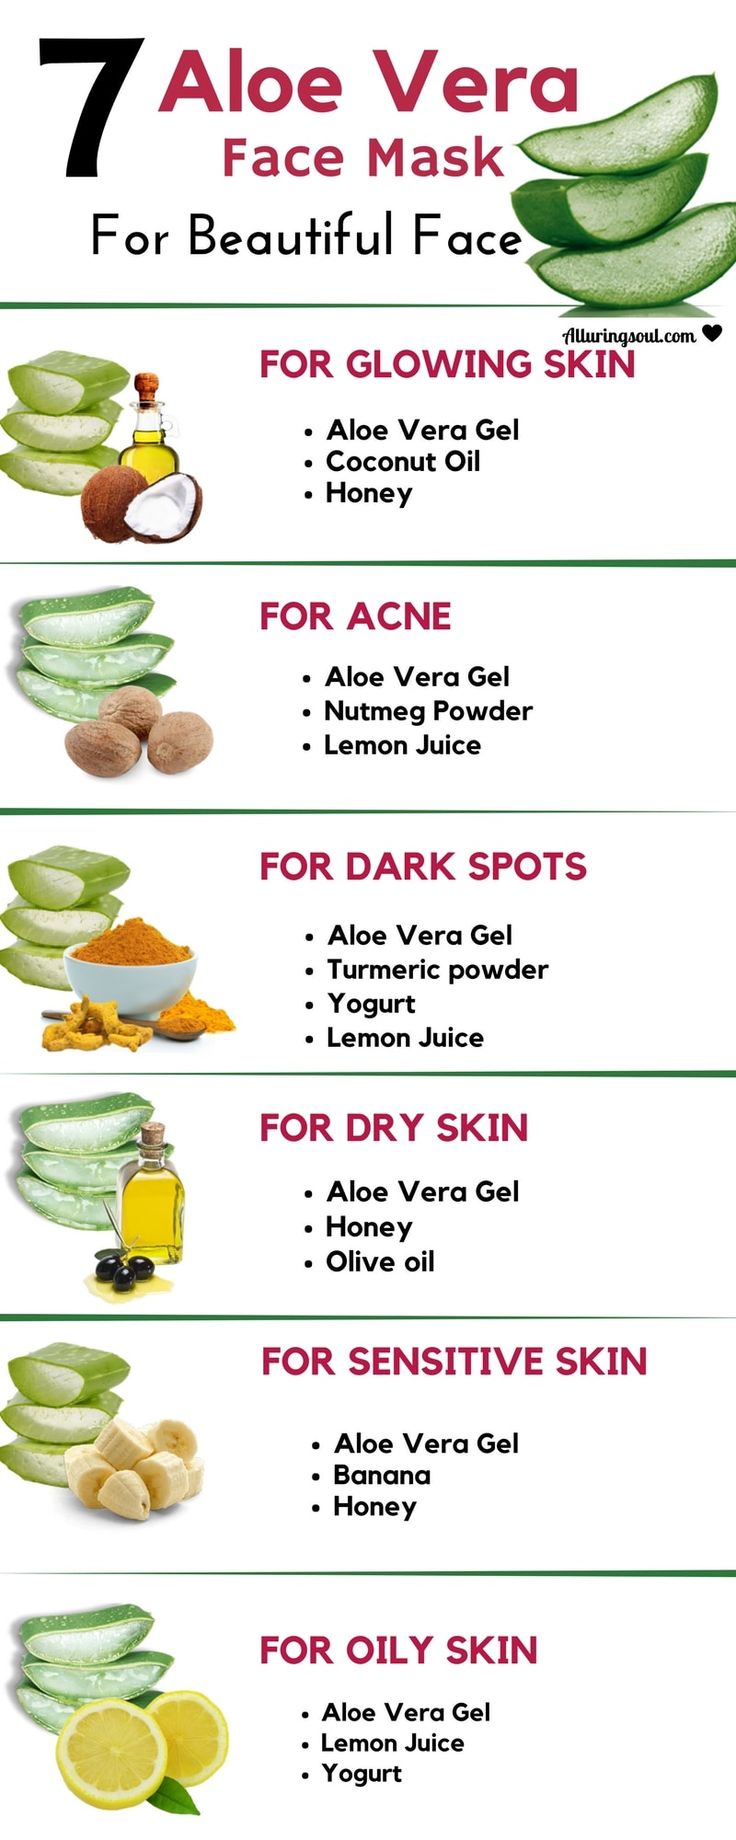 Aloe Vera Face Mask helps every skin problems. It treats acne, dry skin, oily sk...